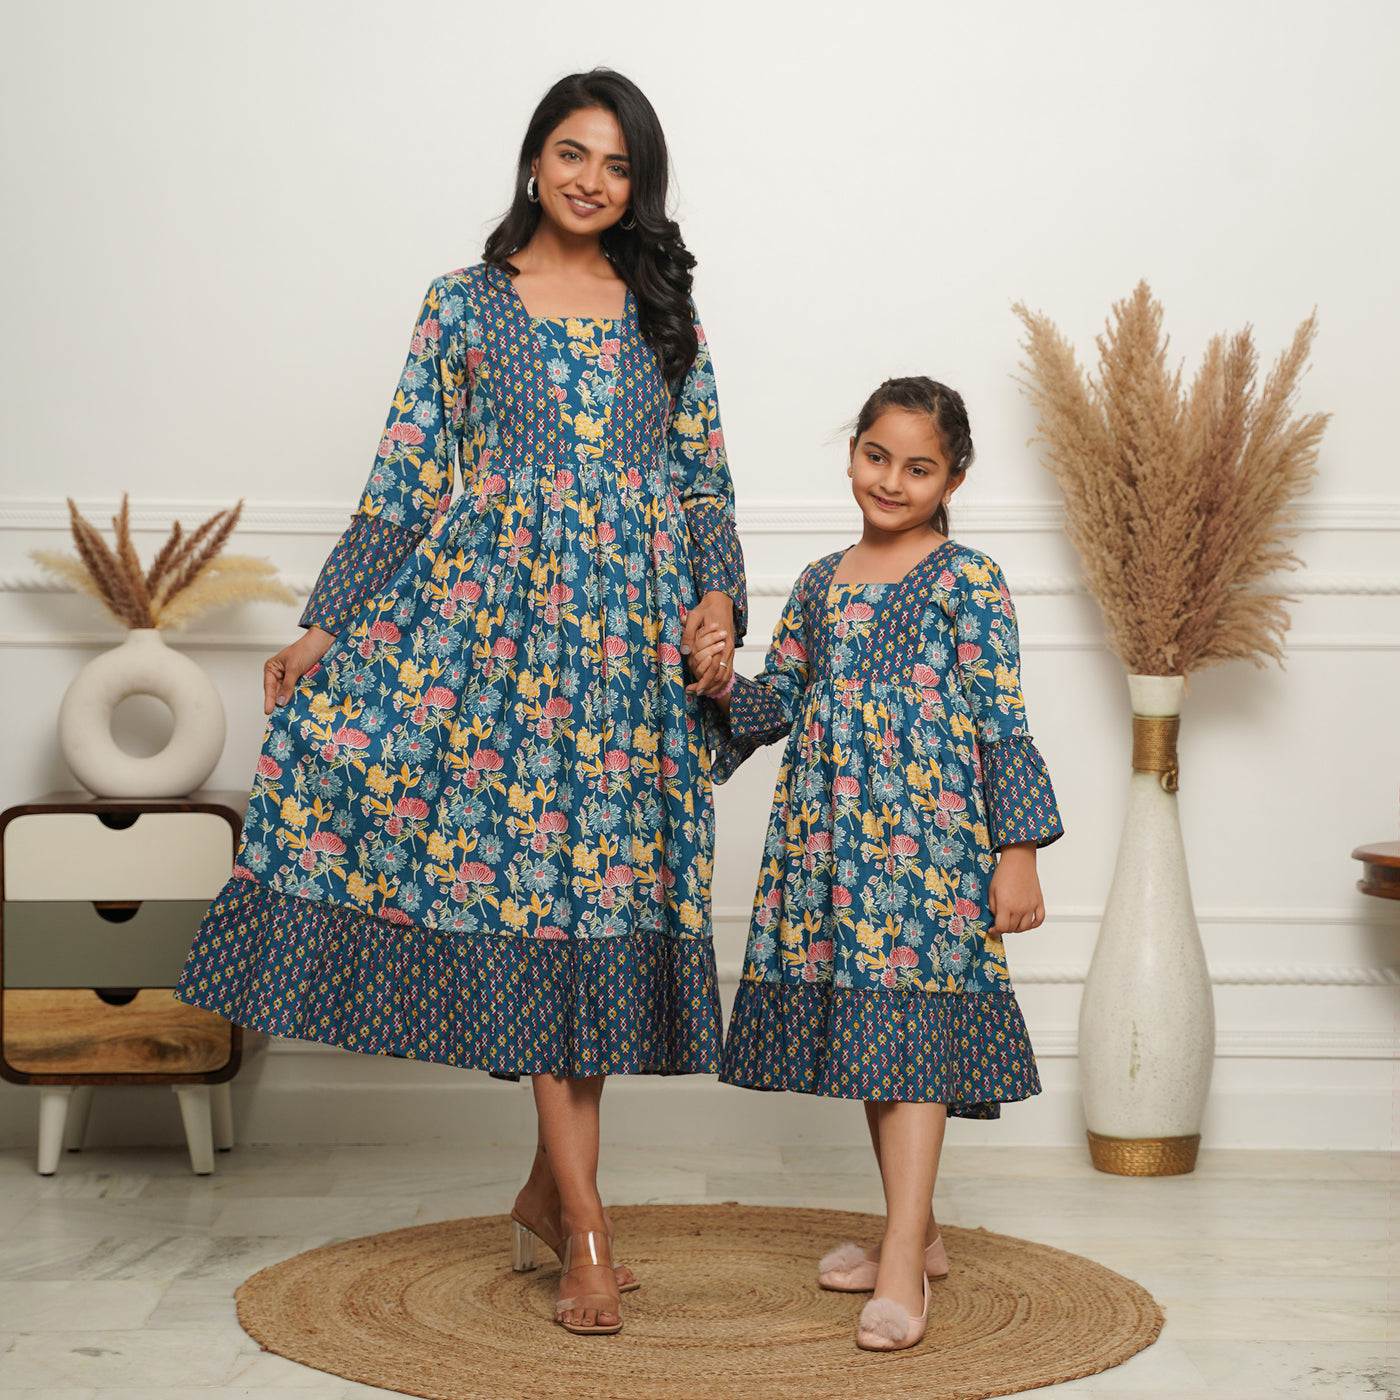 'Blue Mosaic' Mom and Daughter Cotton Dresses